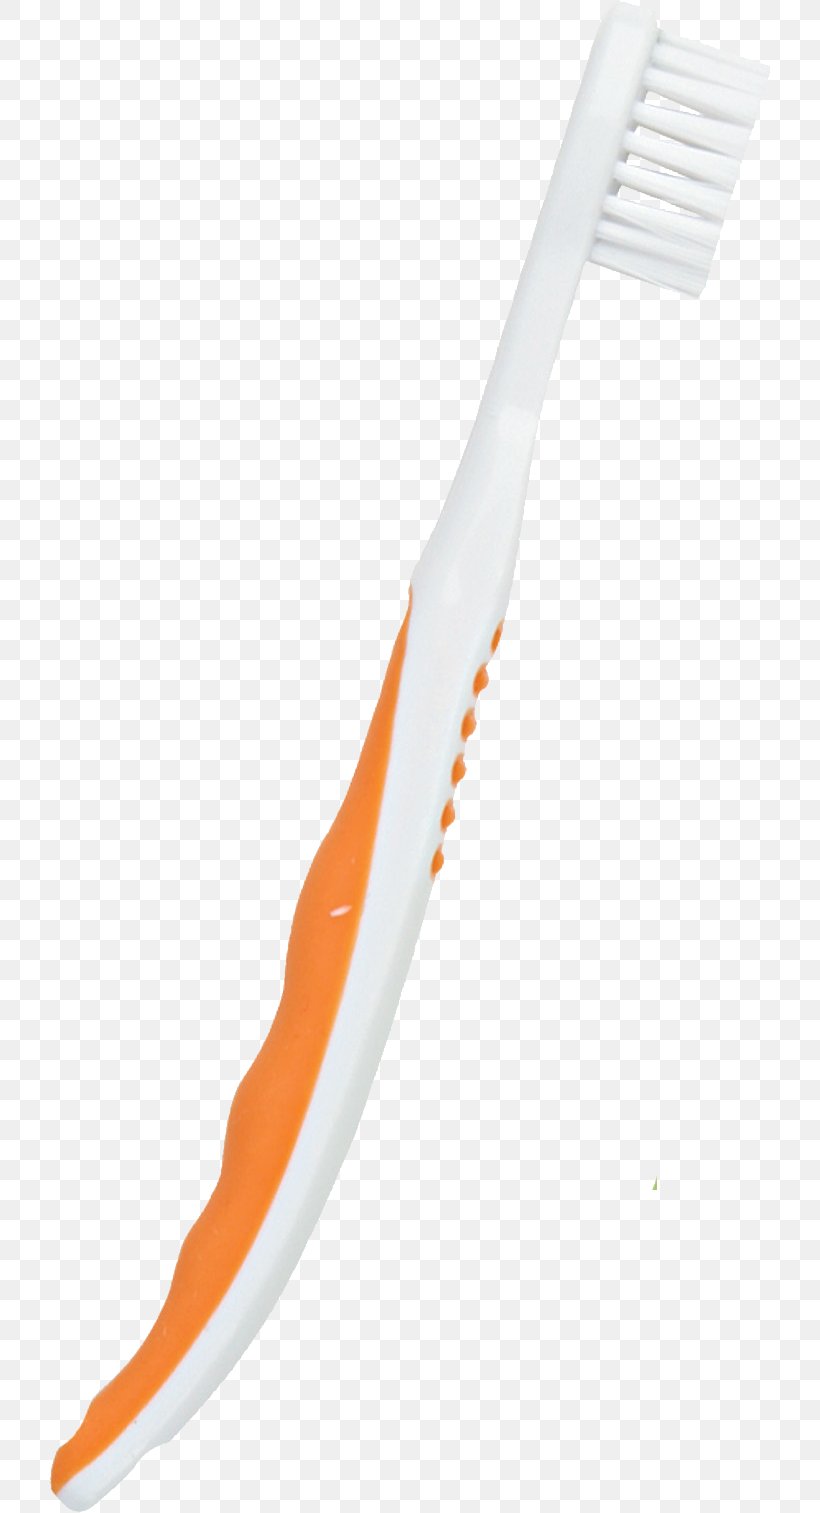 Cold Weapon Design Product, PNG, 722x1513px, Weapon, Cold Weapon, Orange, Product Design Download Free